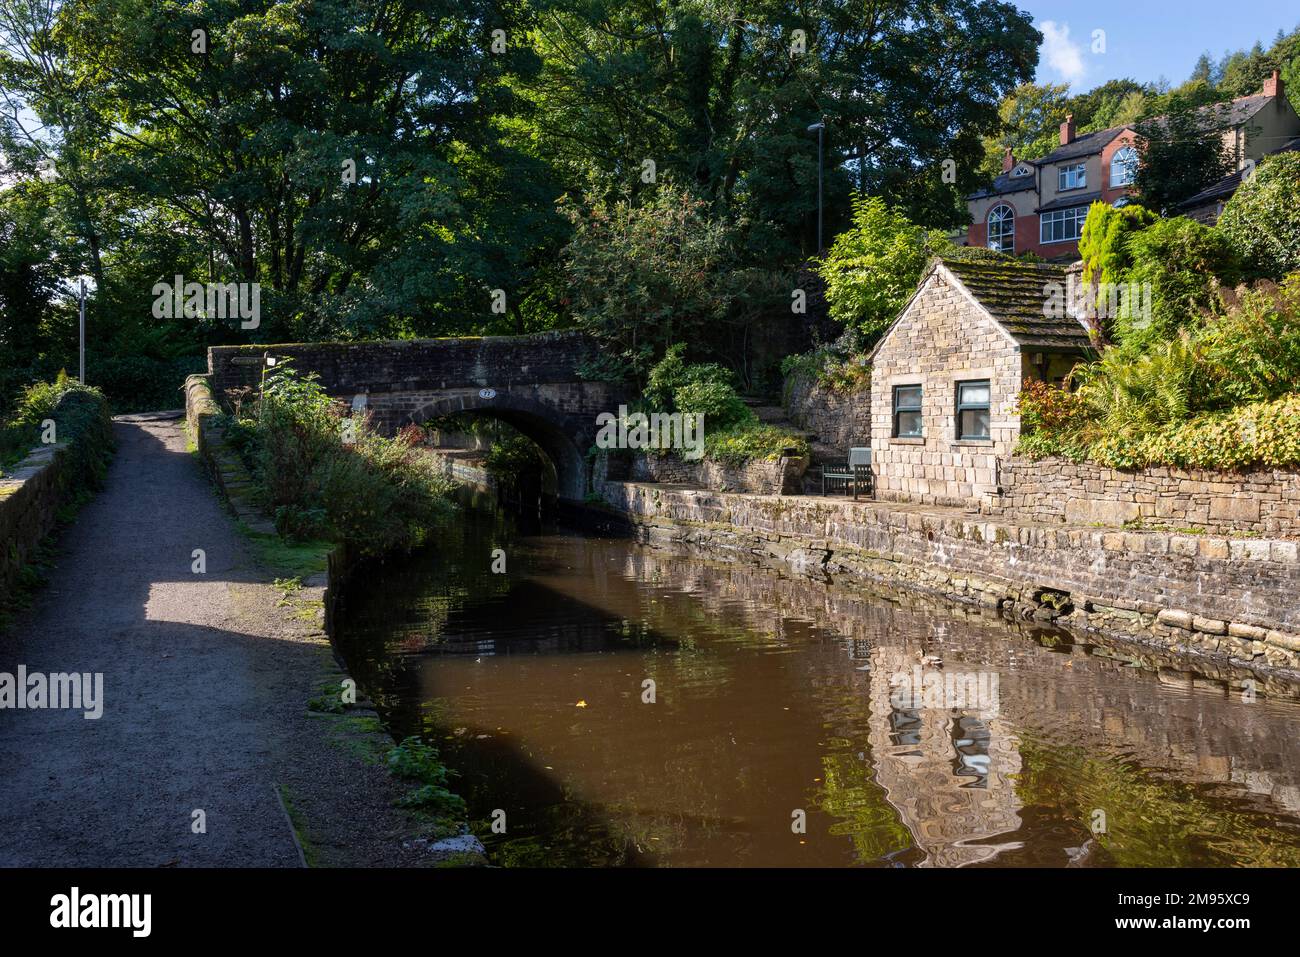 Huddersfield canal at Uppermill, Greater Manchester, England. Stock Photo